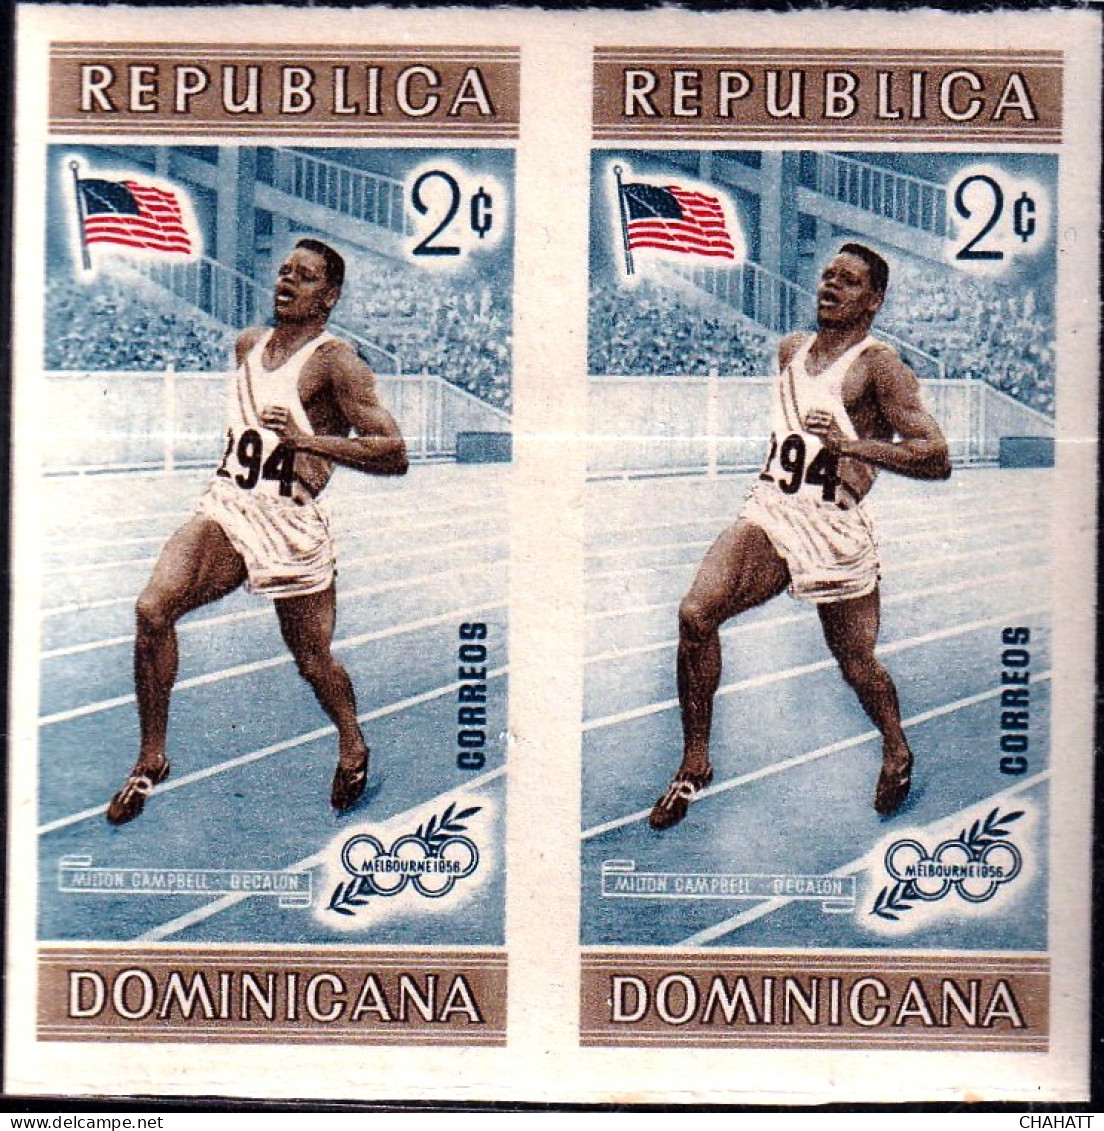 OLYMPICS-1956, MELBOURNE- DECALON (ATHLETICS) IMPERF PAIR-COLOR VARIETY- DOMINICANA-MNH- SCARCE- A5-745 - Sommer 1956: Melbourne